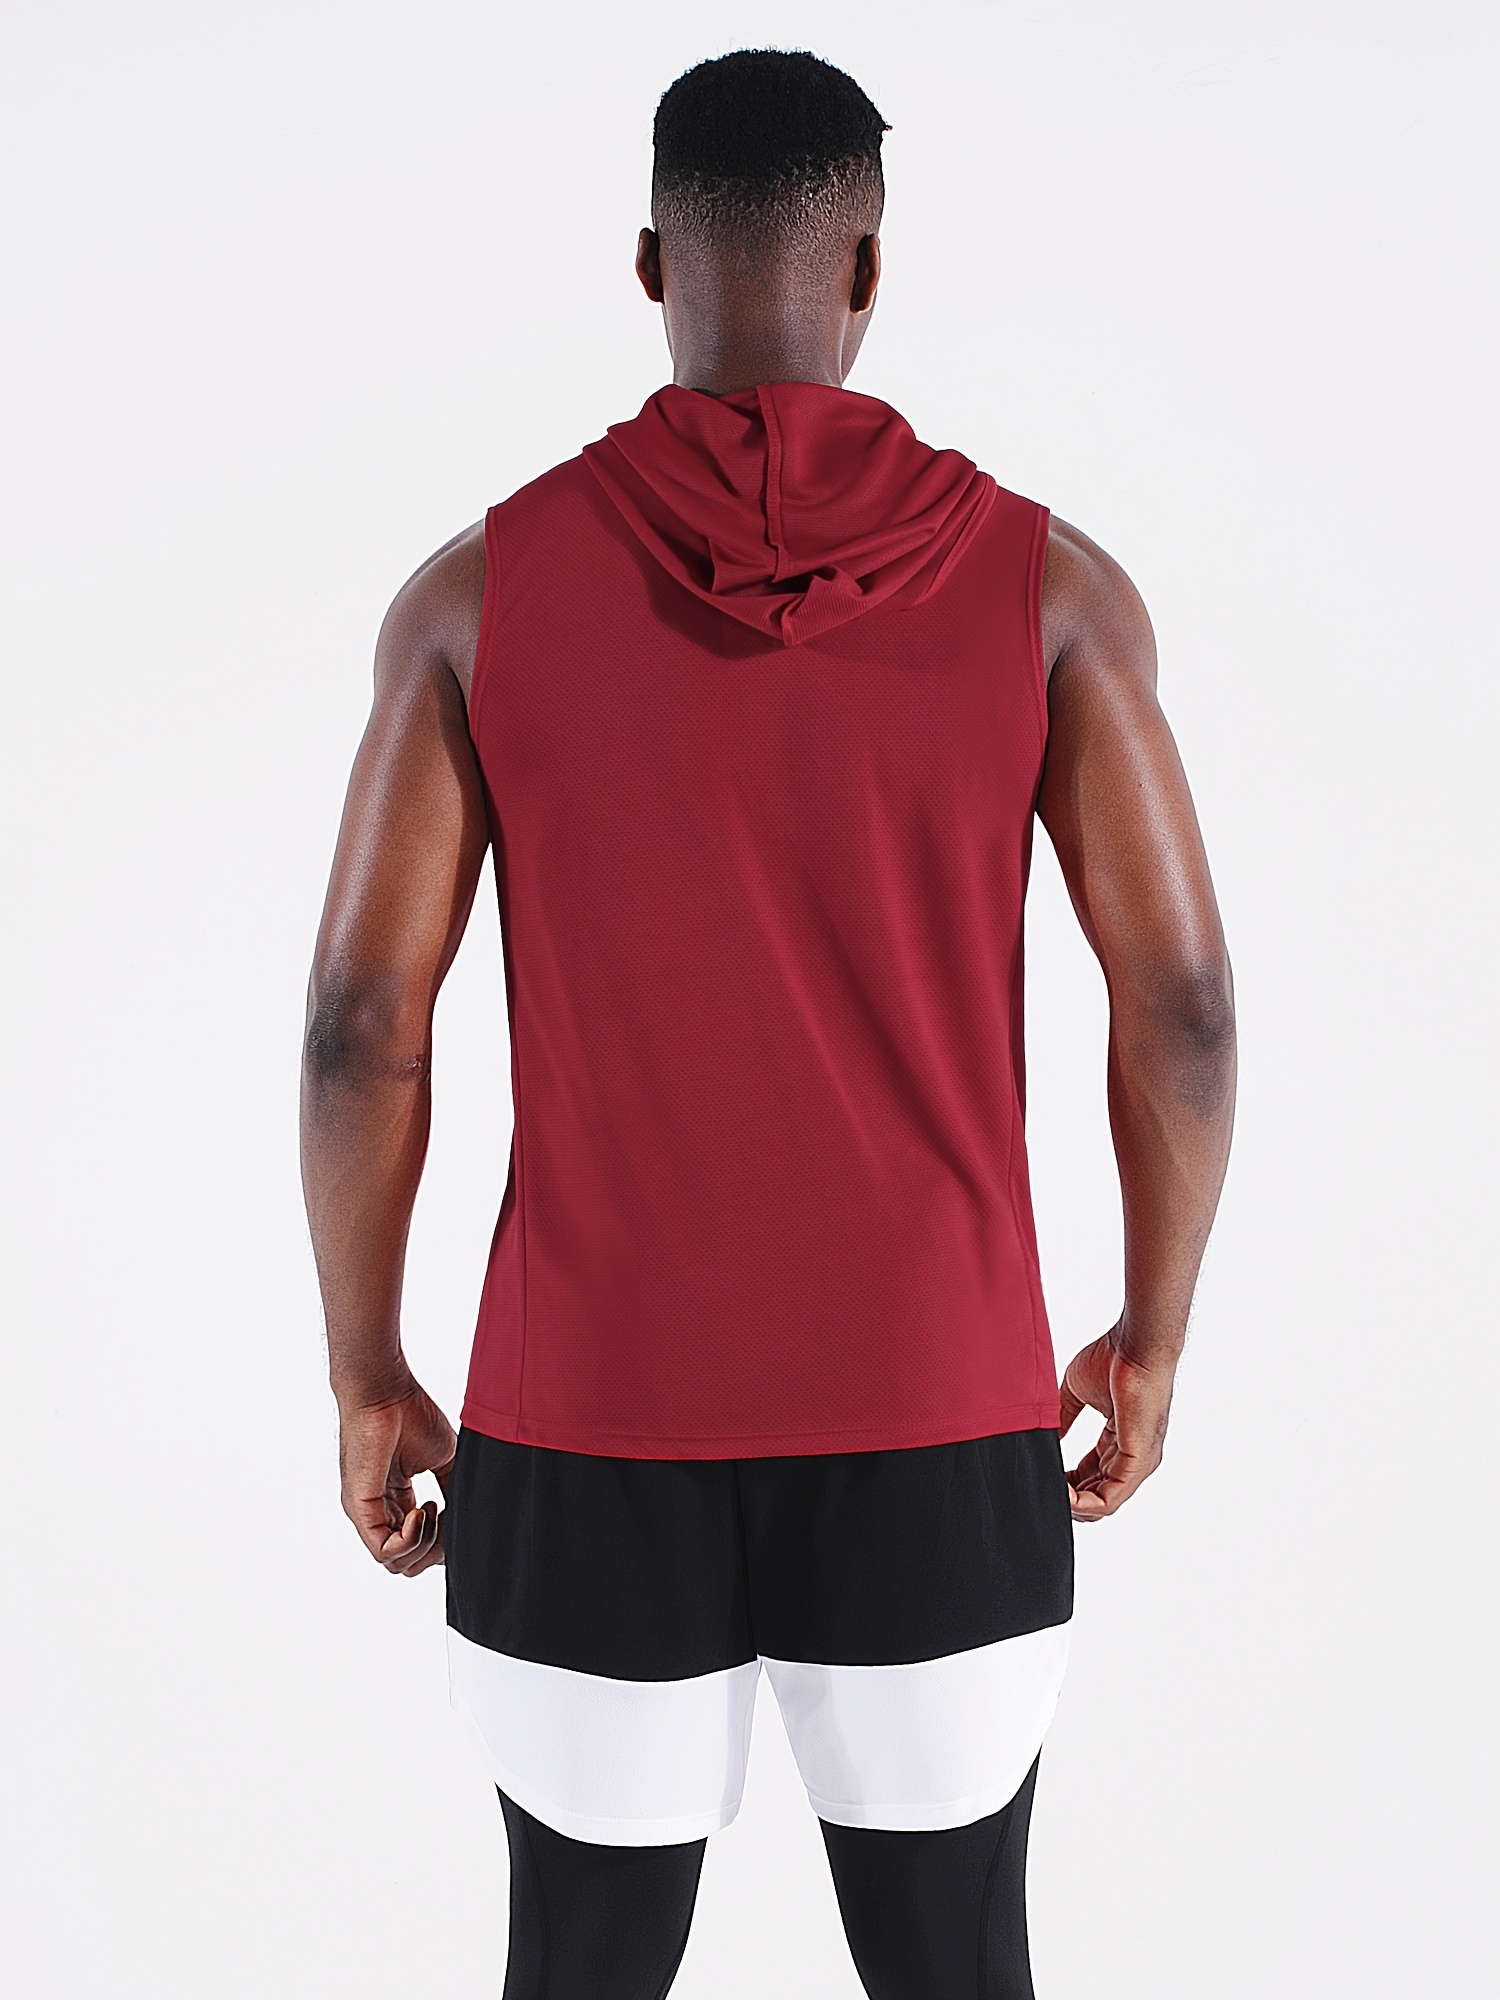 Gyms Summer Brand Stretchy Sleeveless Shirt Casual Fashion Hooded